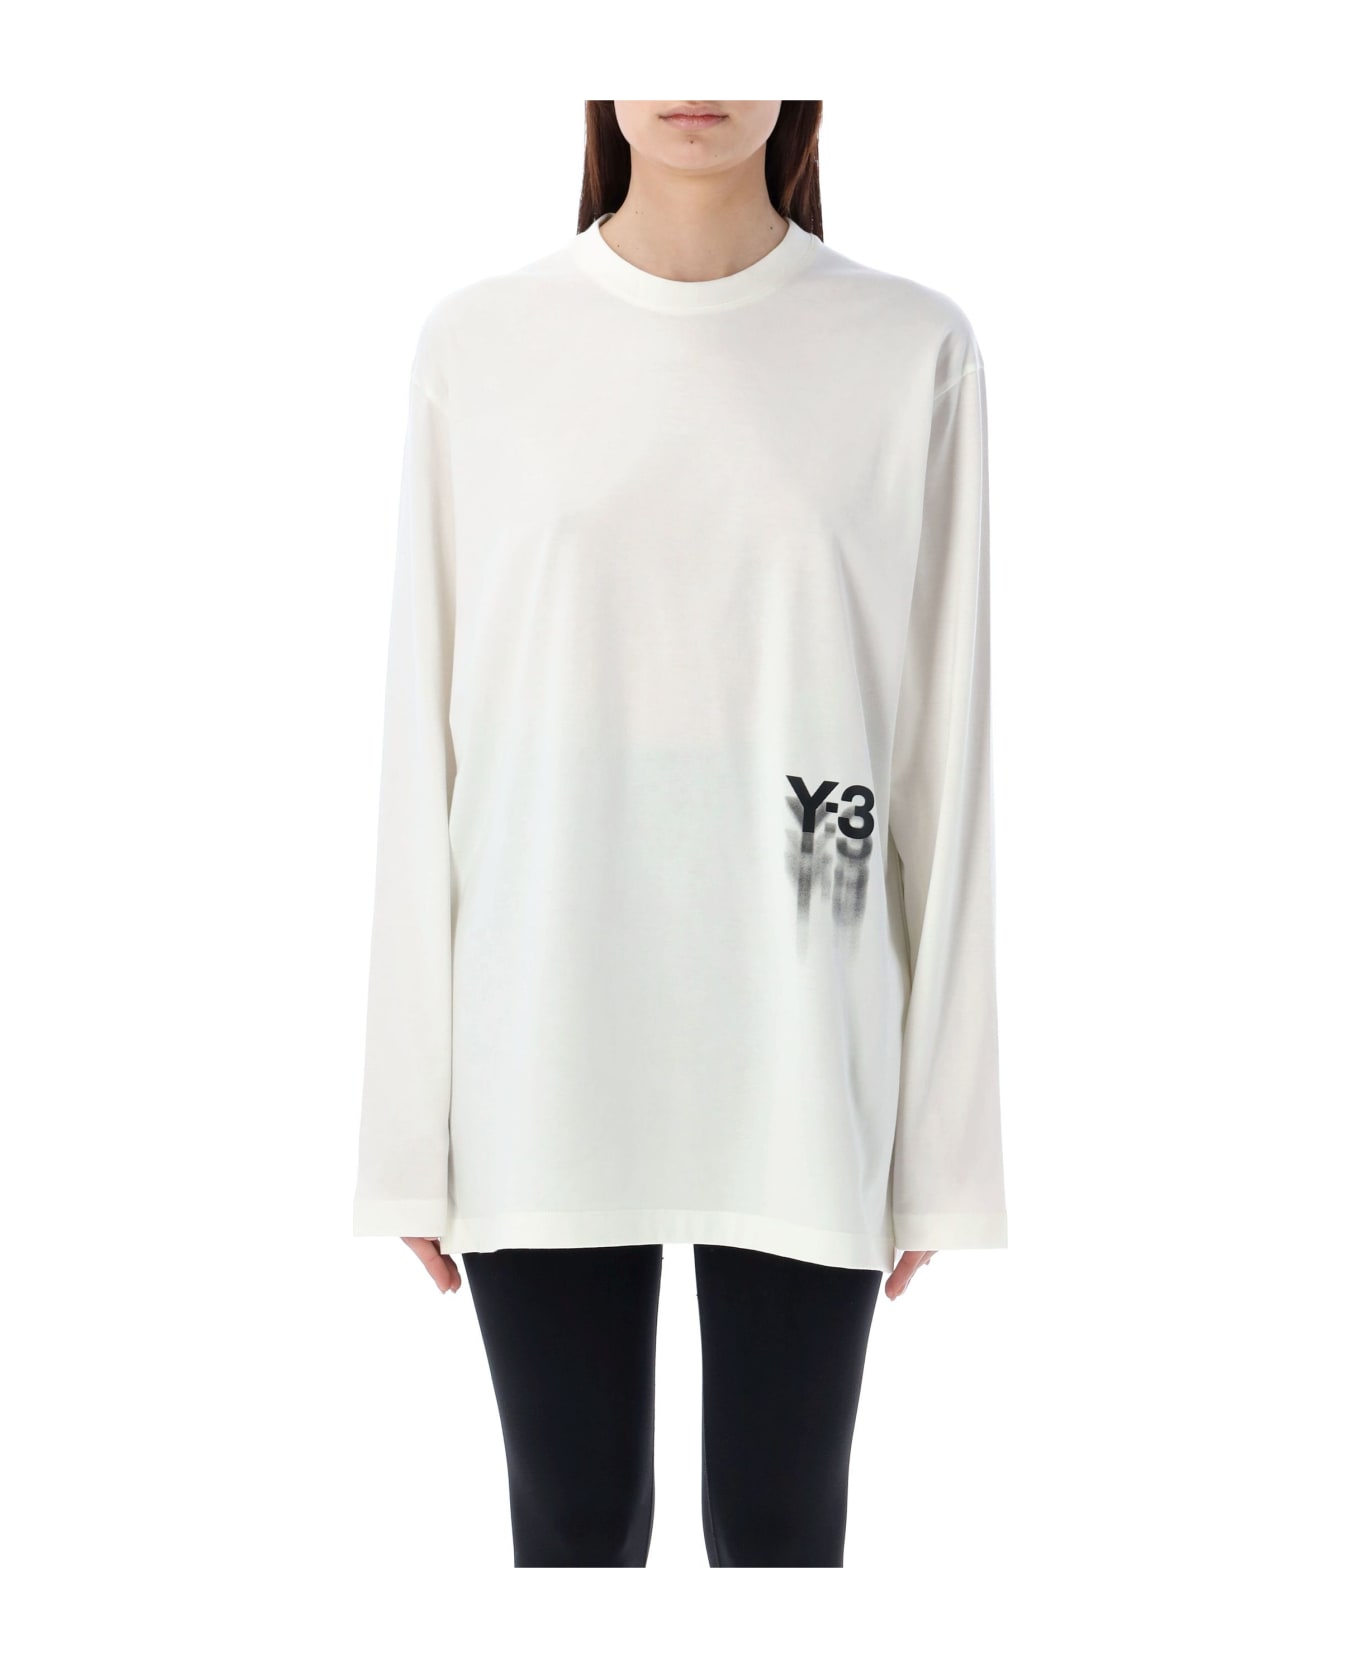 Y-3 Graphic Long Sleeves Tee - WHITE